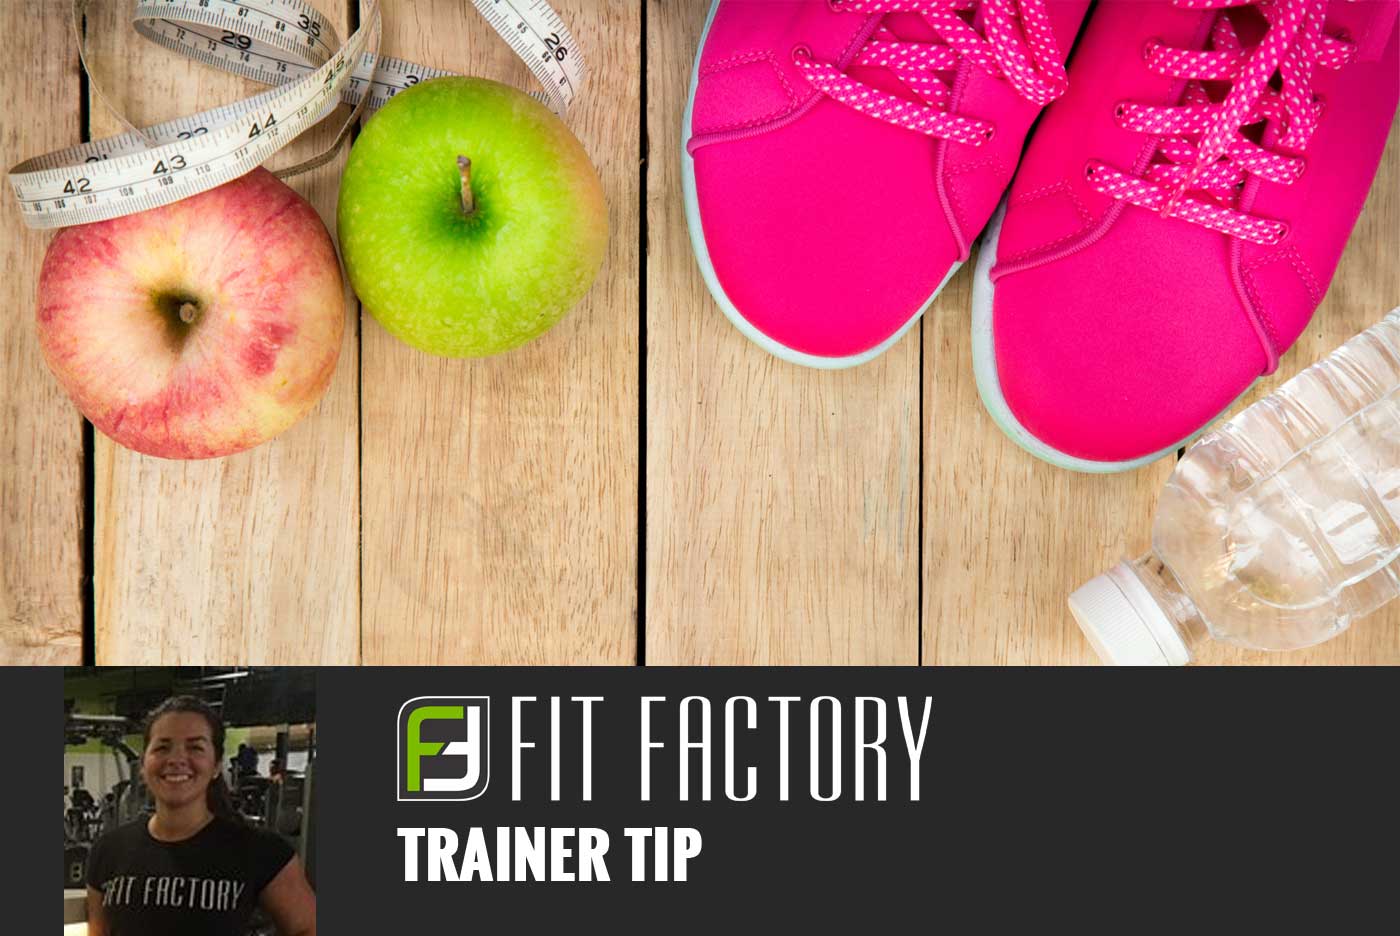 Trainer Tip: Stay Consistent with diet and exercise